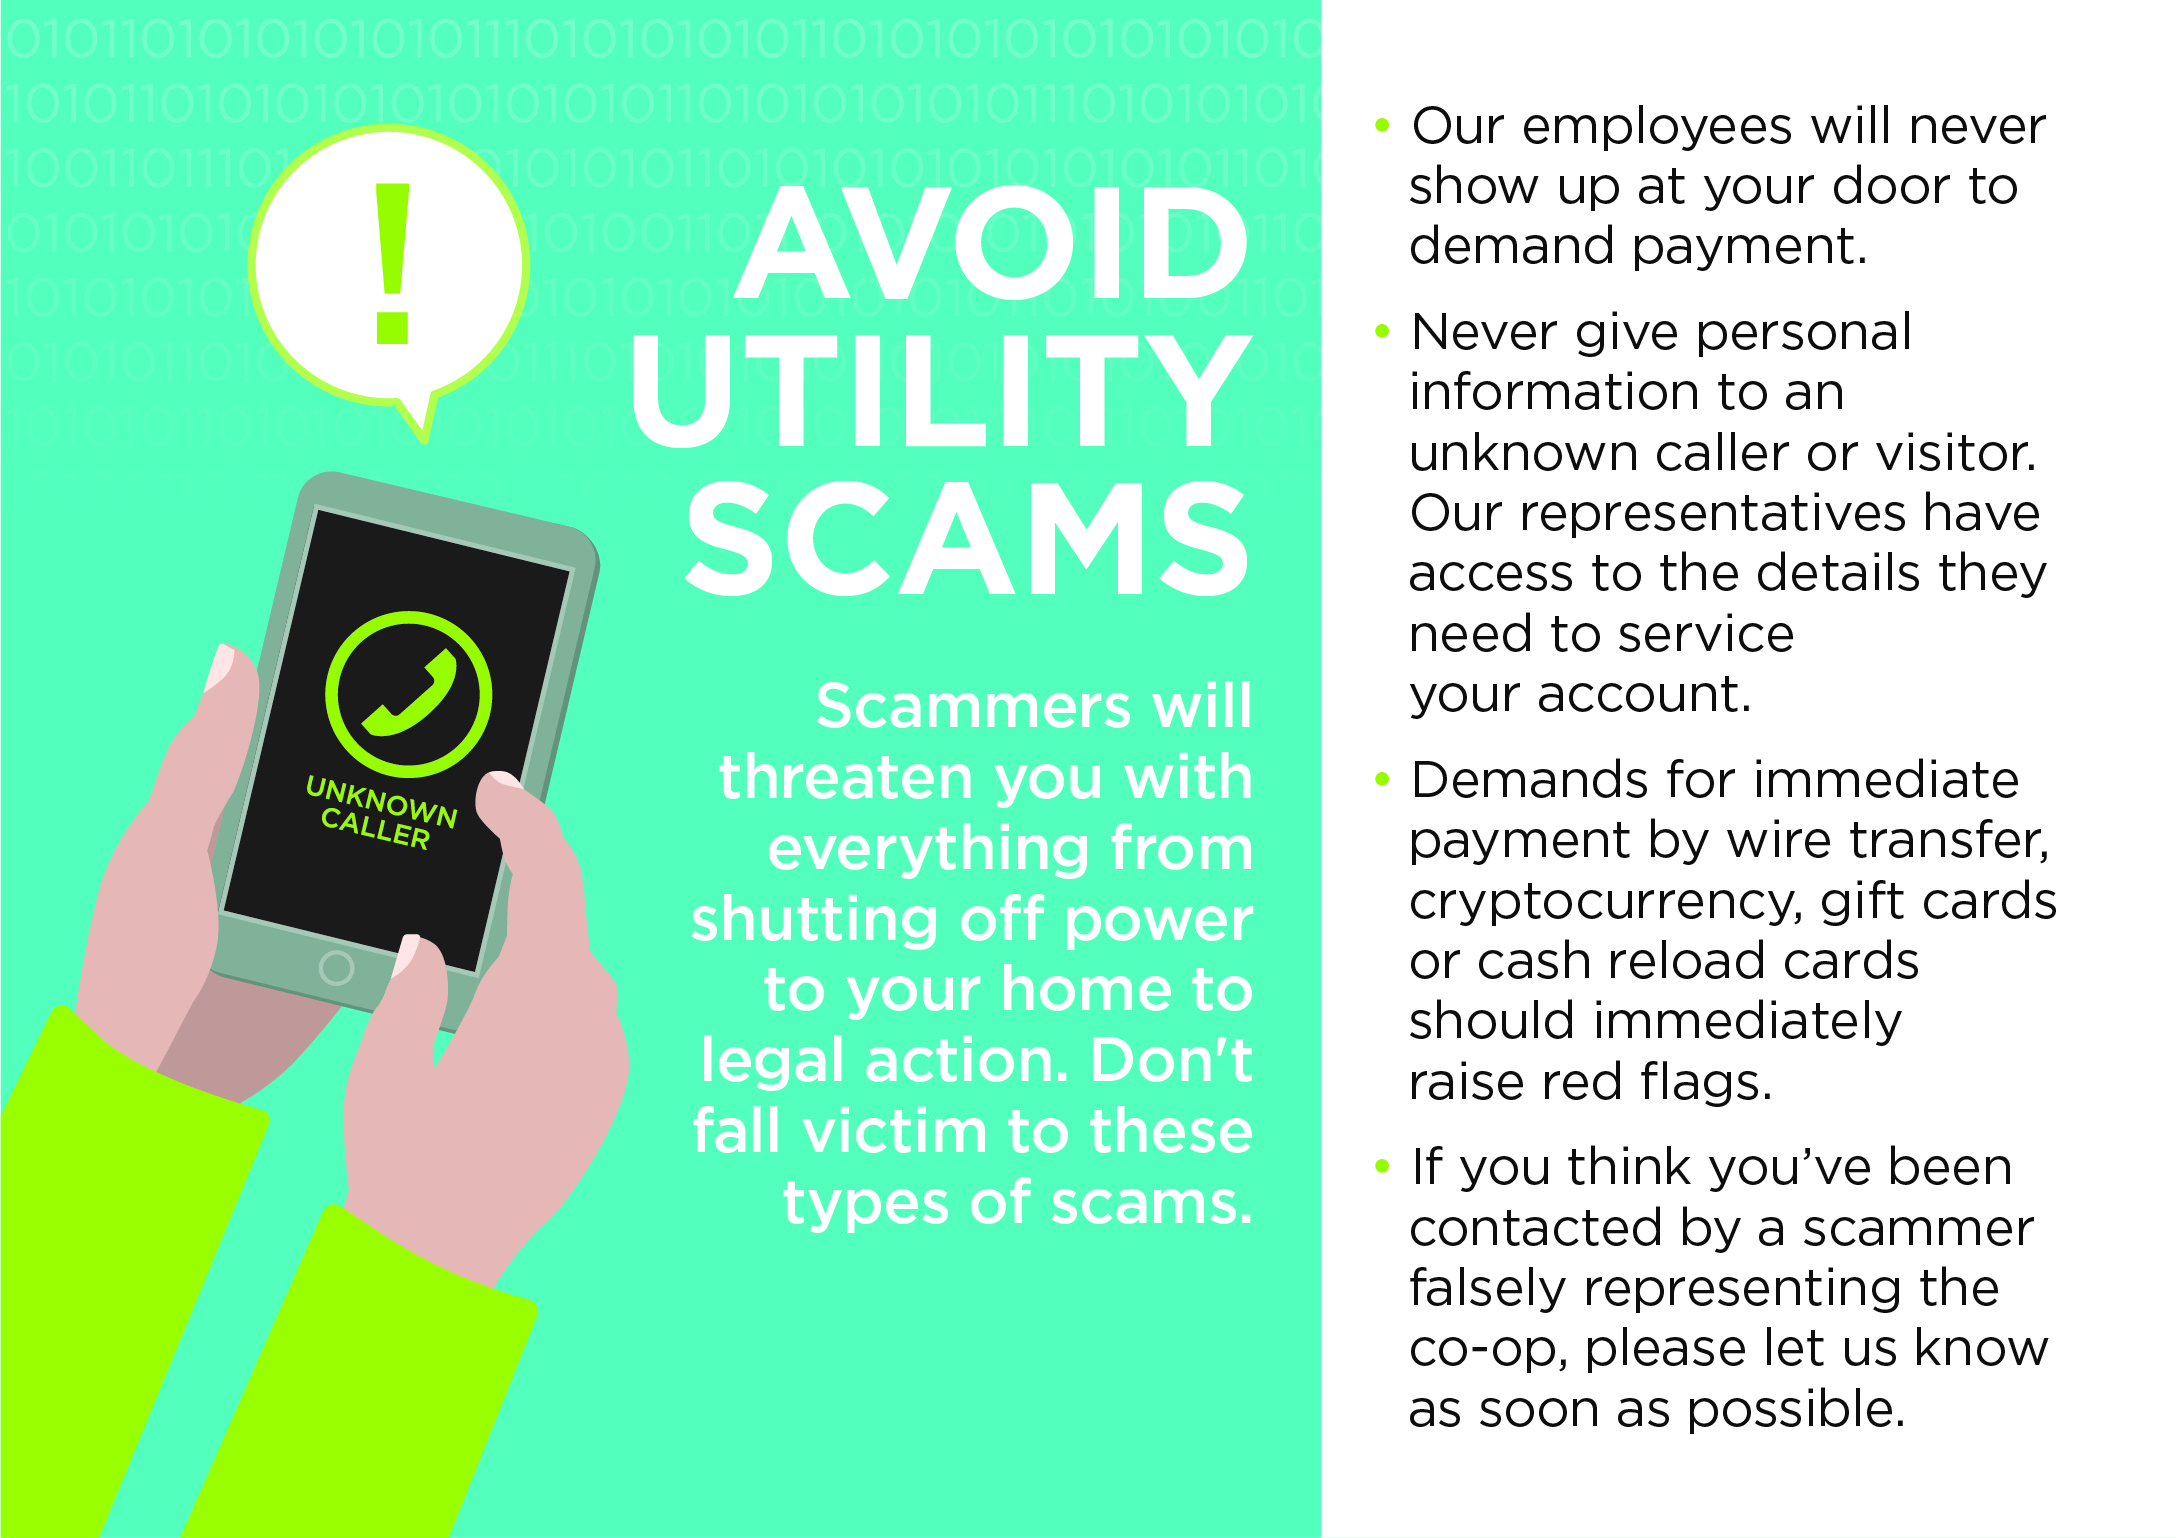 Tips to Avoid Utility Scams